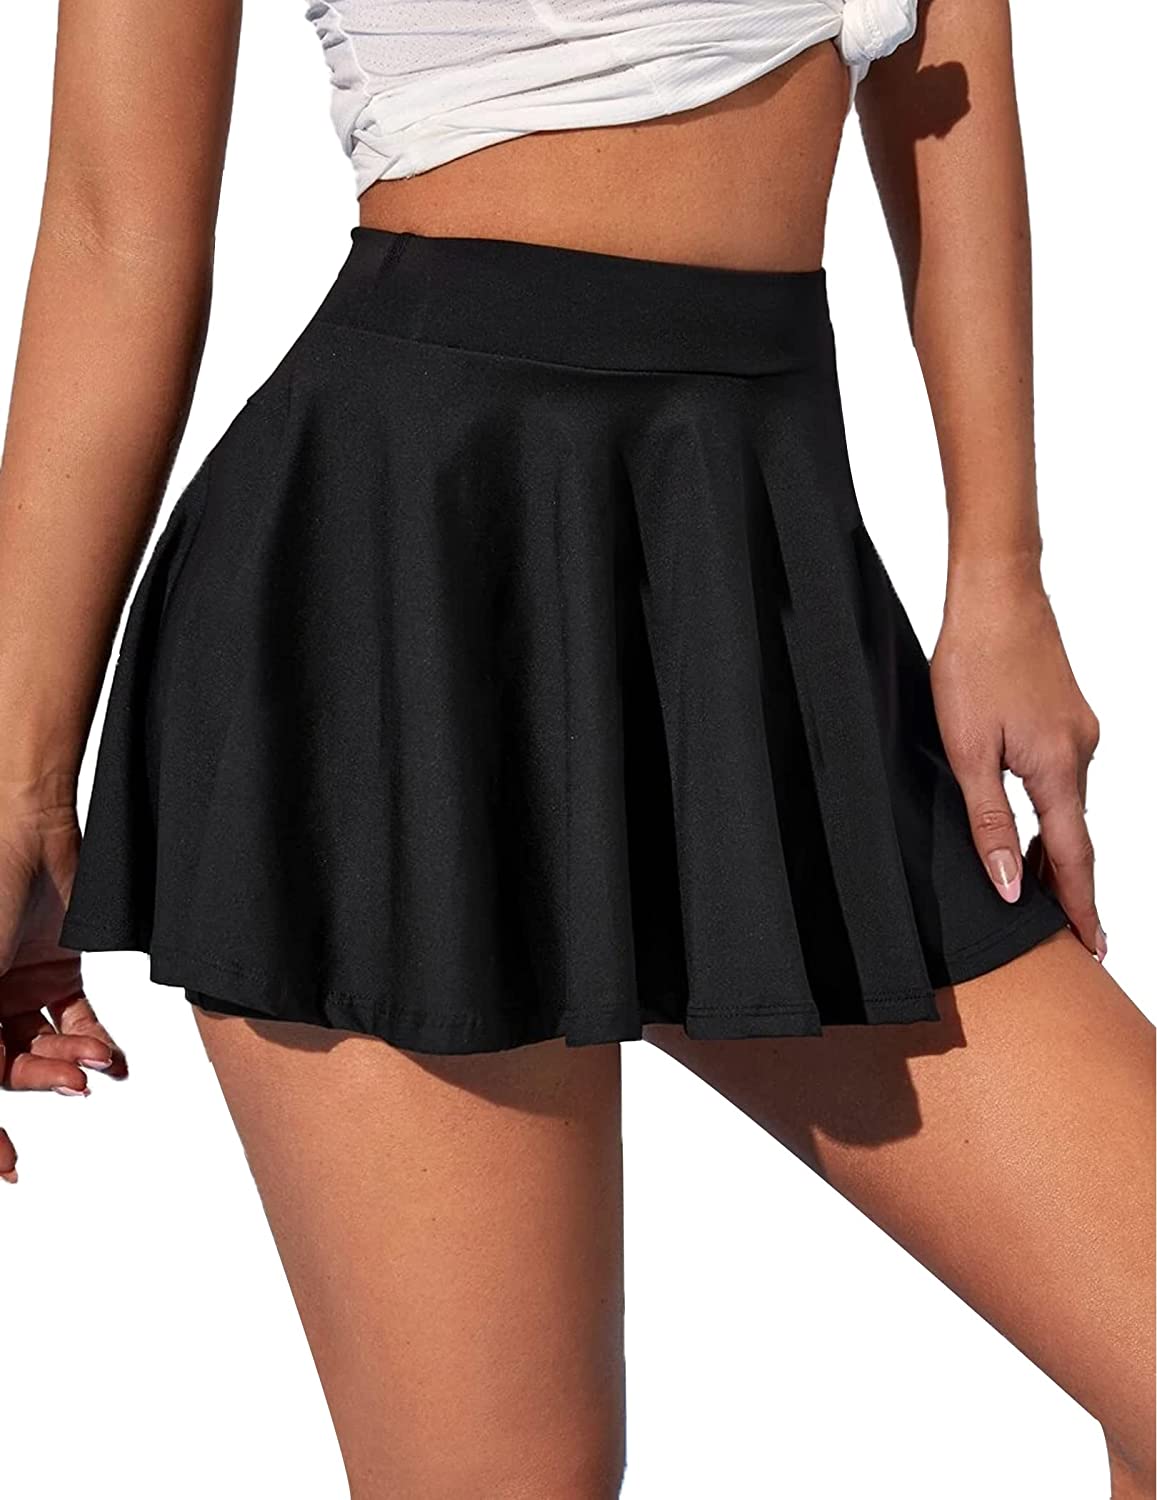 COOrun Womens Pleated Tennis Skirts with Shorts and Pockets Athletic Skort  for G | eBay